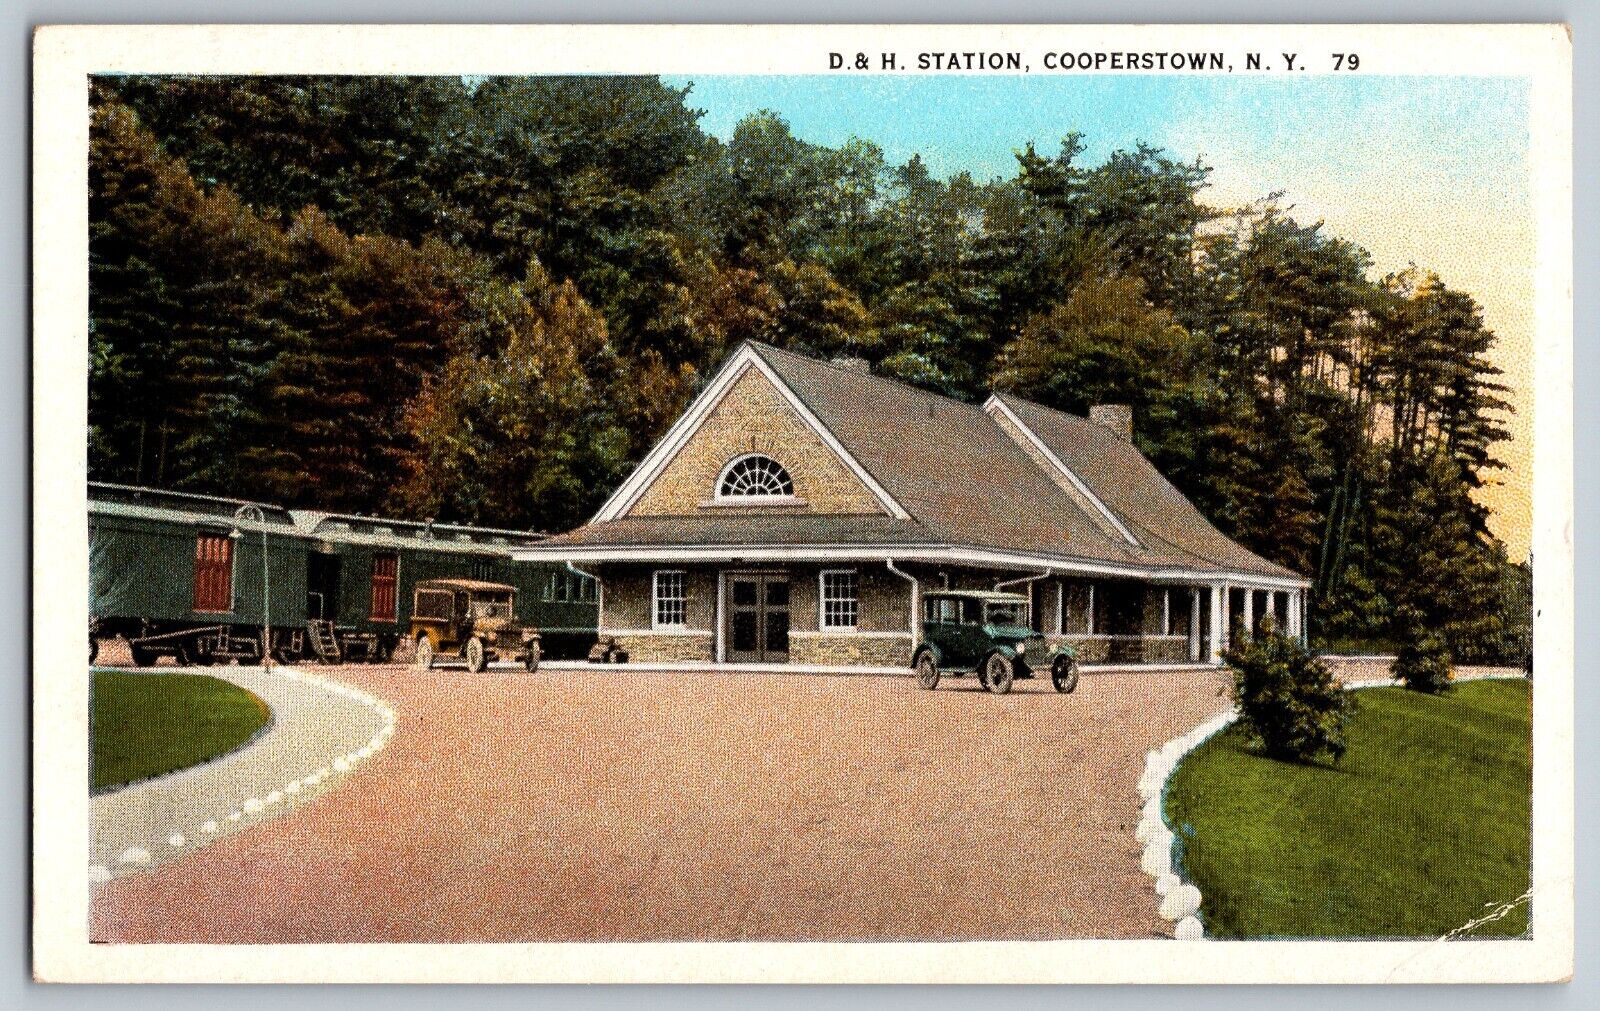 Cooperstown, New York NY - D. & H. Station - Vintage Postcards - Unposted